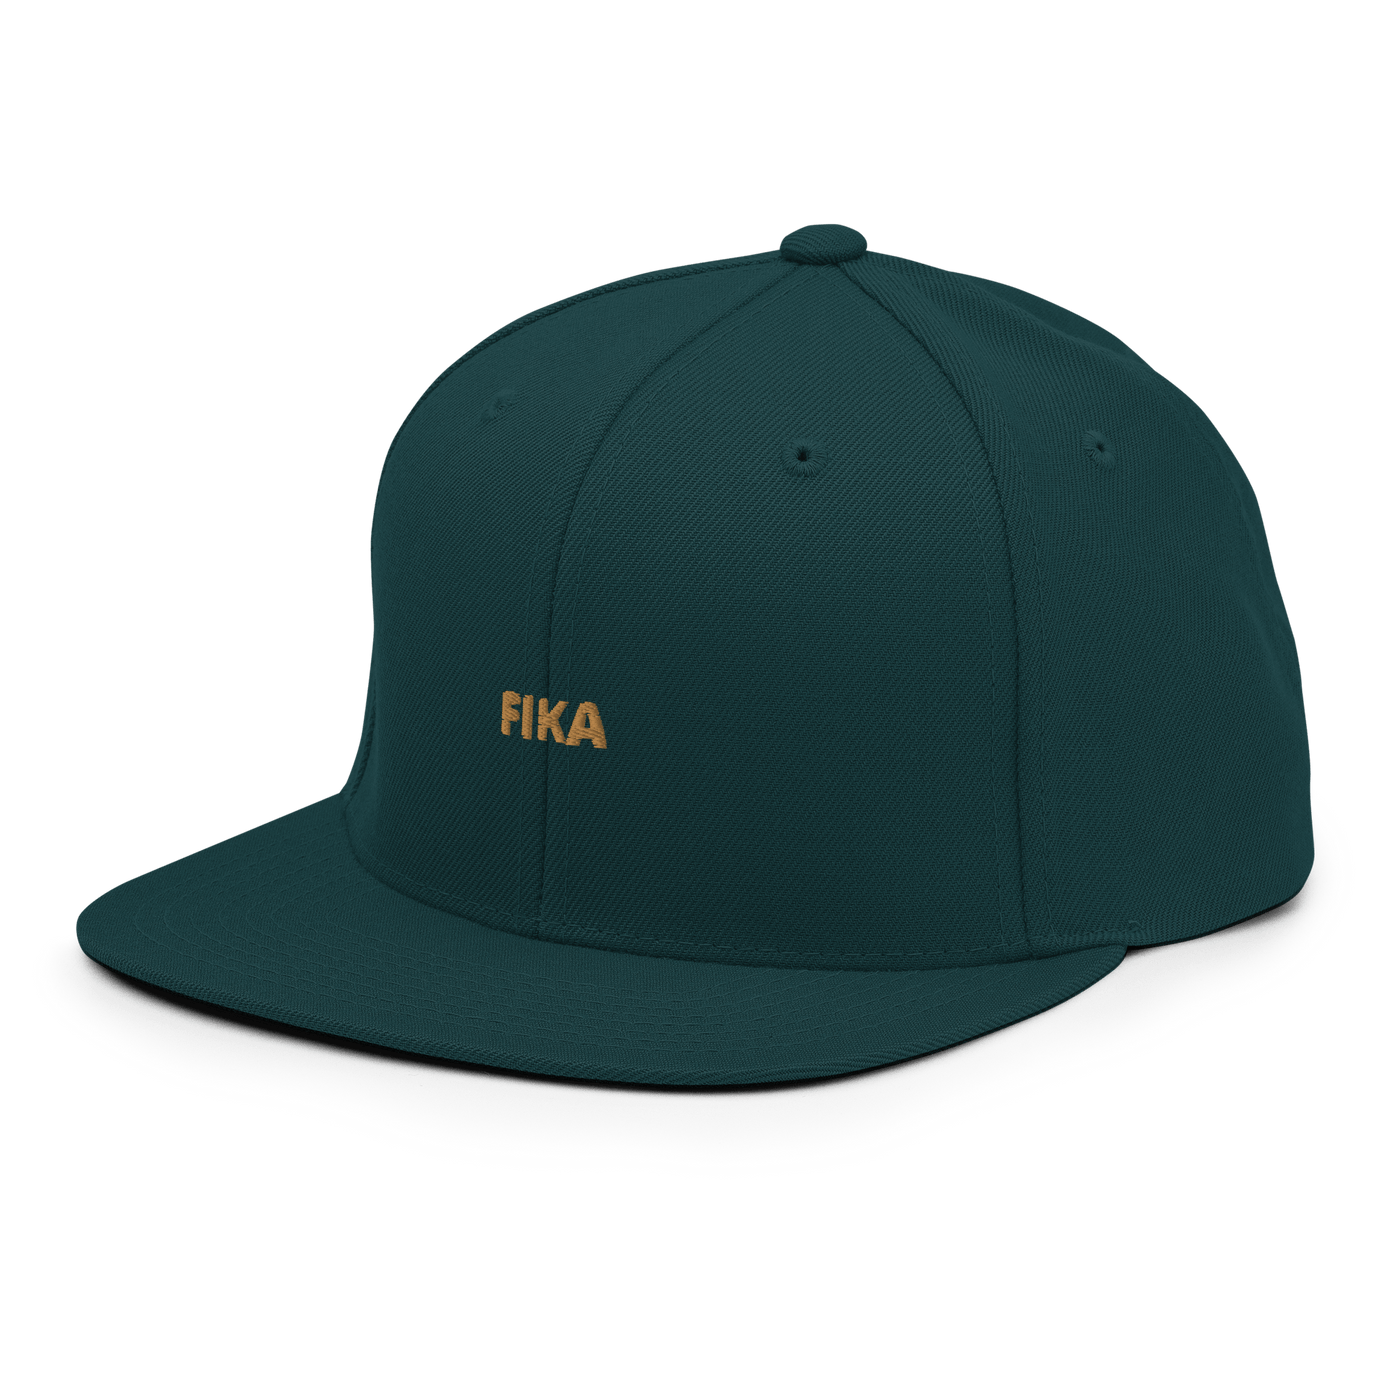 FIKA Snapback - Spruce - - Just Another Cap Store